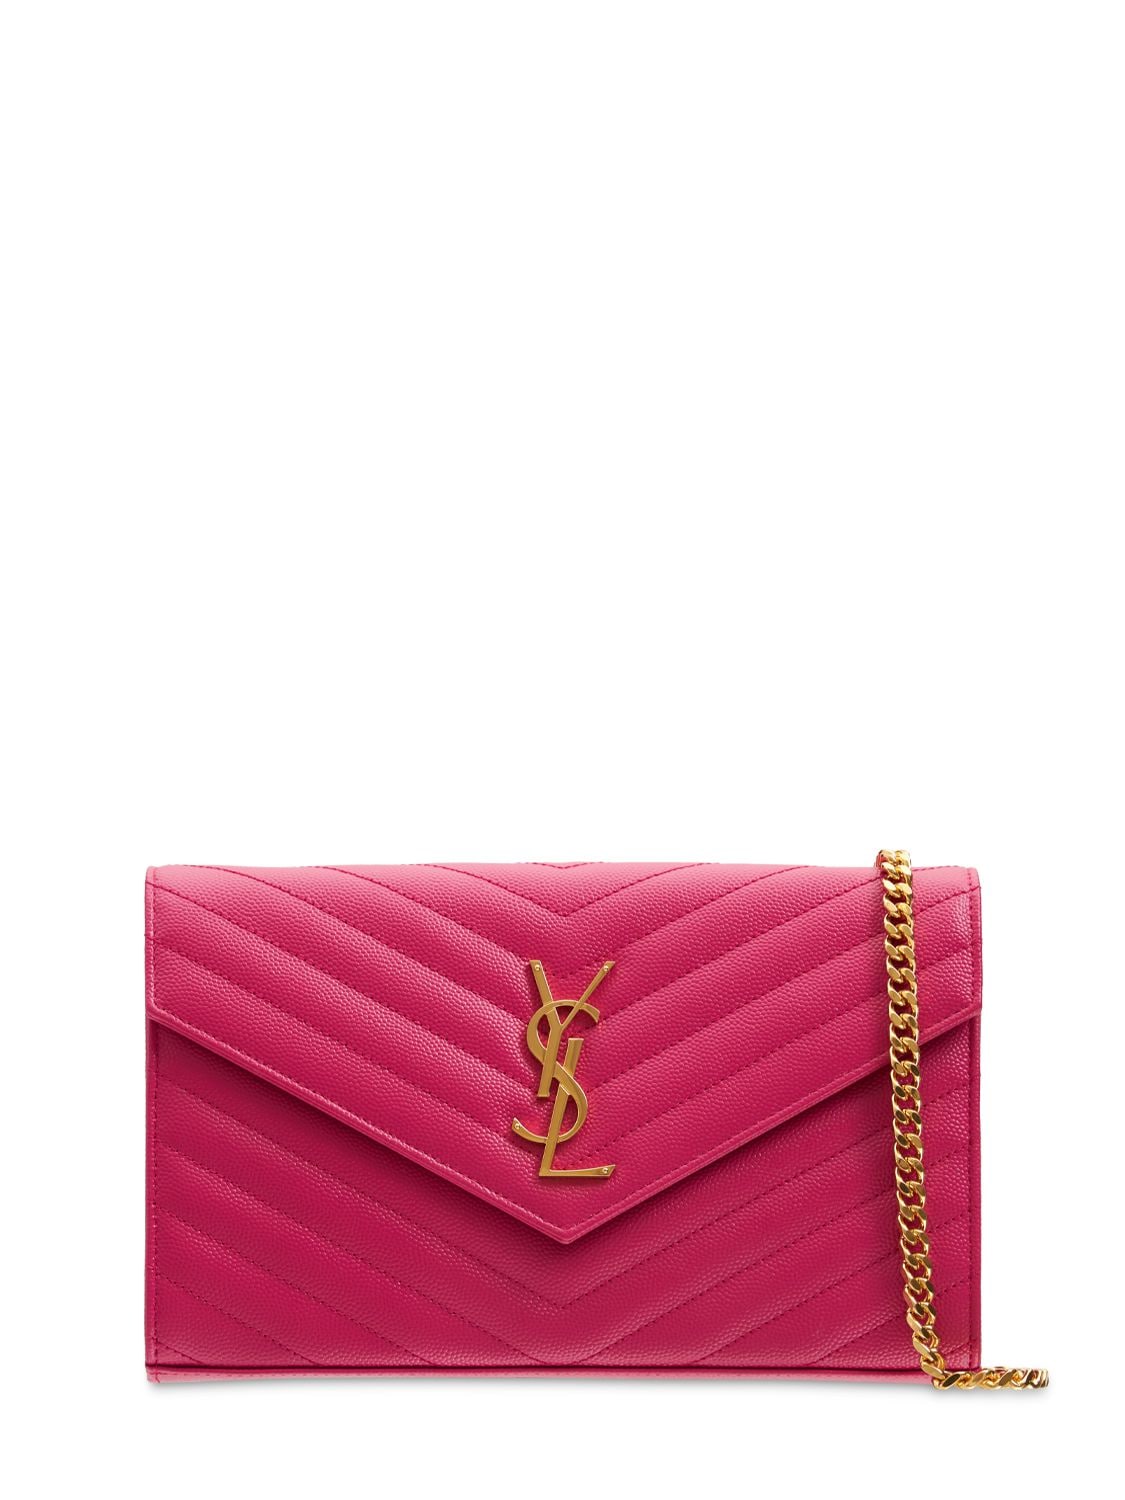 Saint Laurent Monogram Embossed Leather Chain Wallet In Fuxia Cout